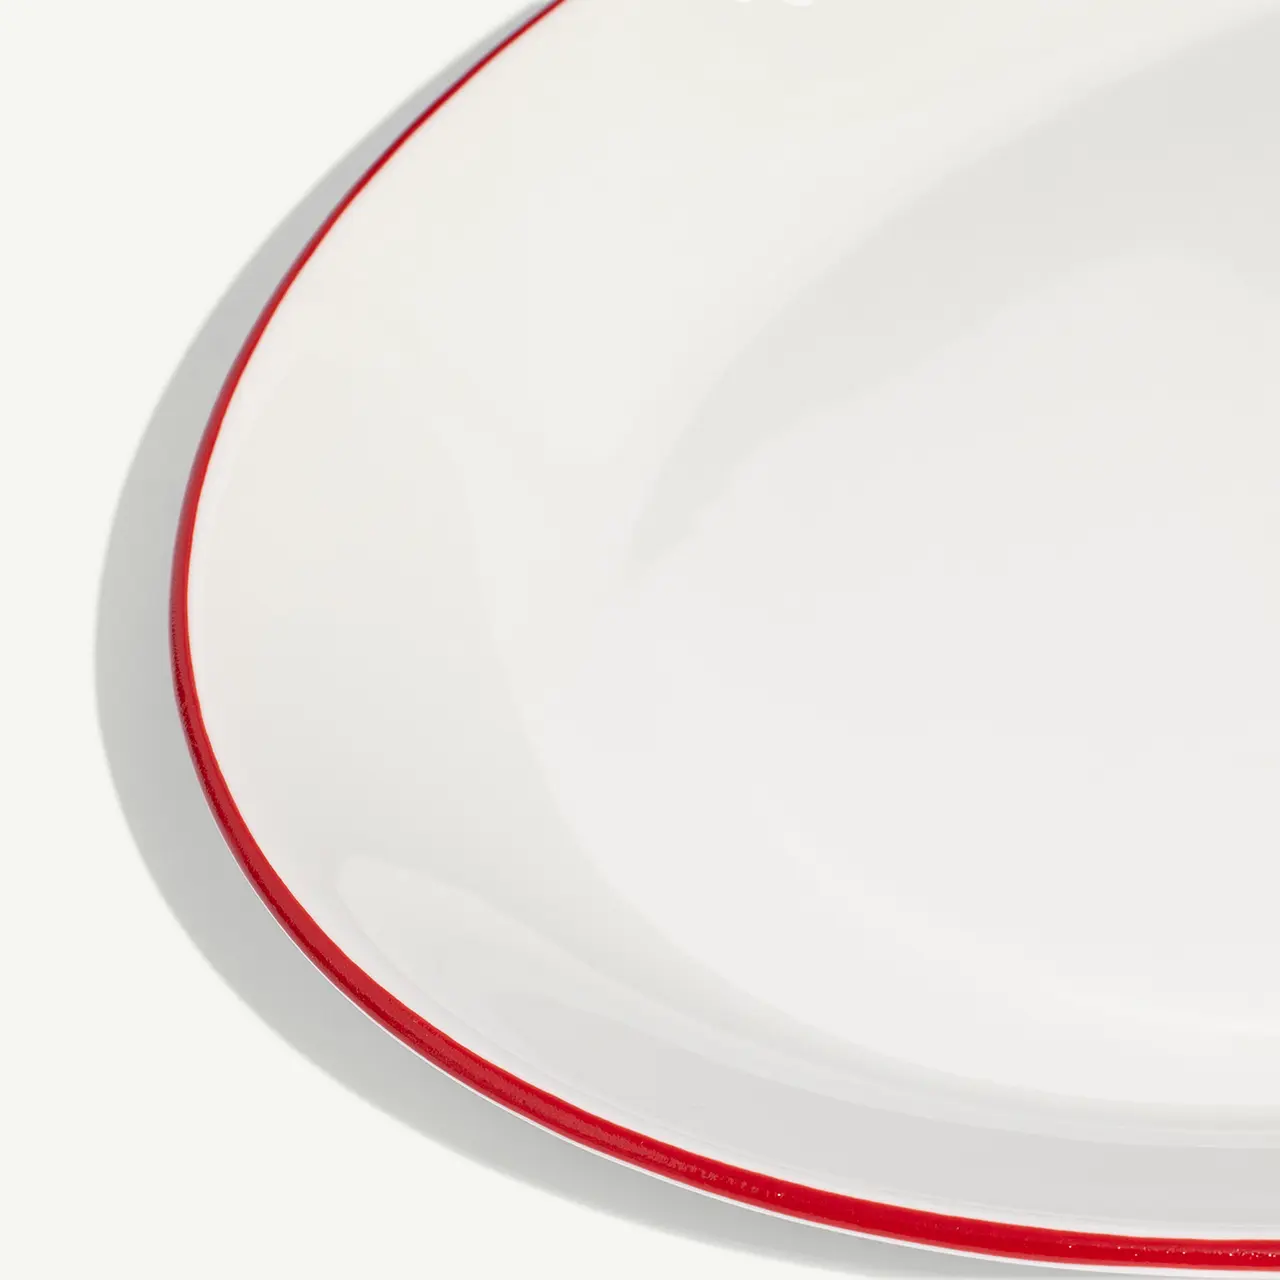 A close-up of a white plate with a red rim on a white background.